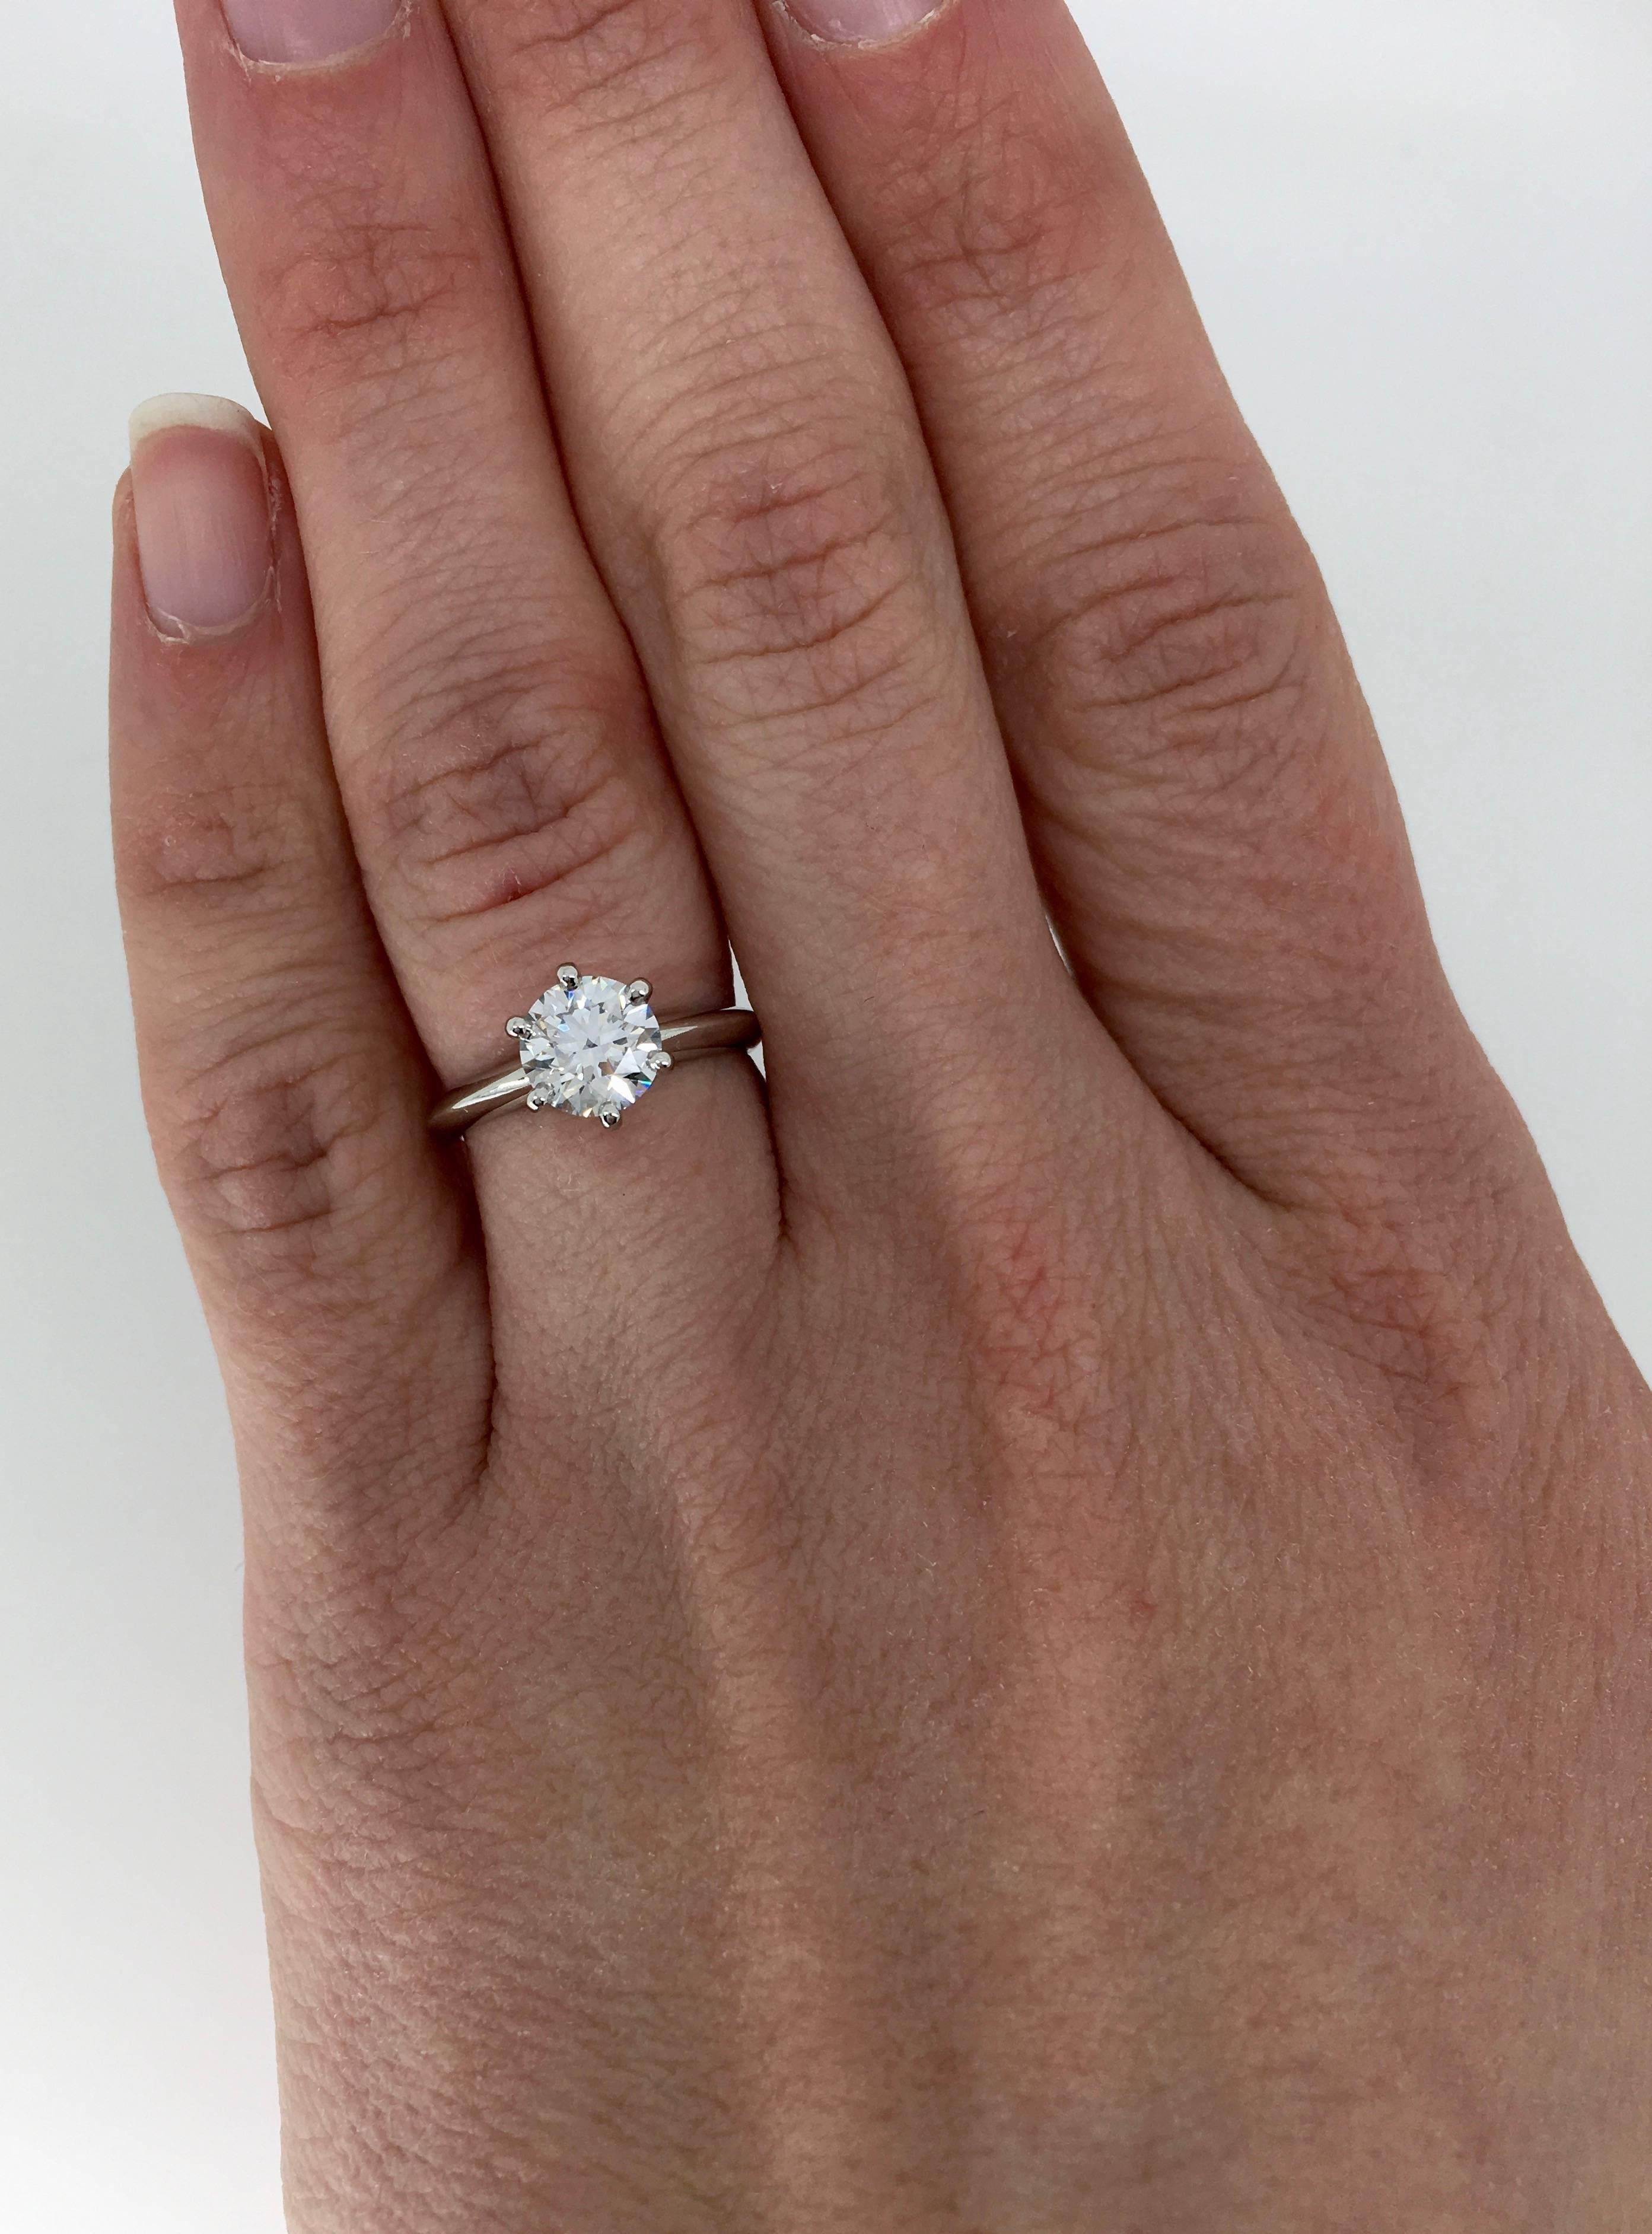 This authentic Tiffany & Co. classic 6 prong solitaire features a GIA Certified 1.08CT Round Brilliant Cut Diamond with E color and VVS2 clarity. The platinum ring is currently a size 4 and weighs 4.4 grams. The ring is stamped with the makers mark